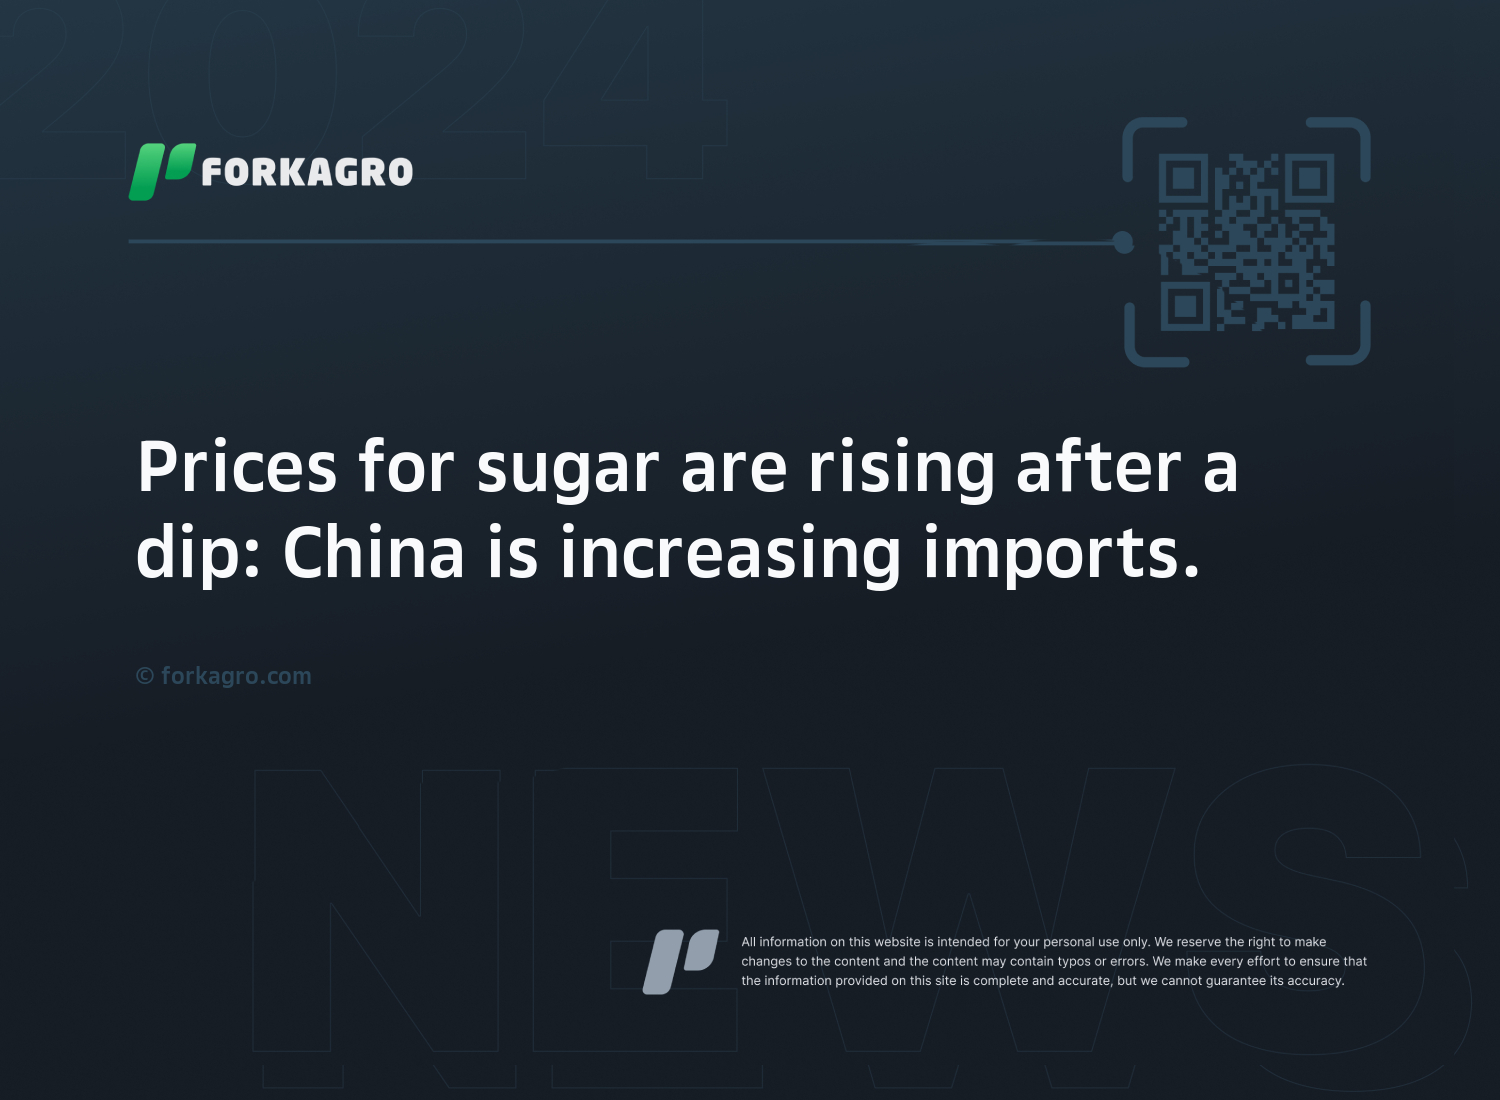 Prices for sugar are rising after a dip: China is increasing imports.